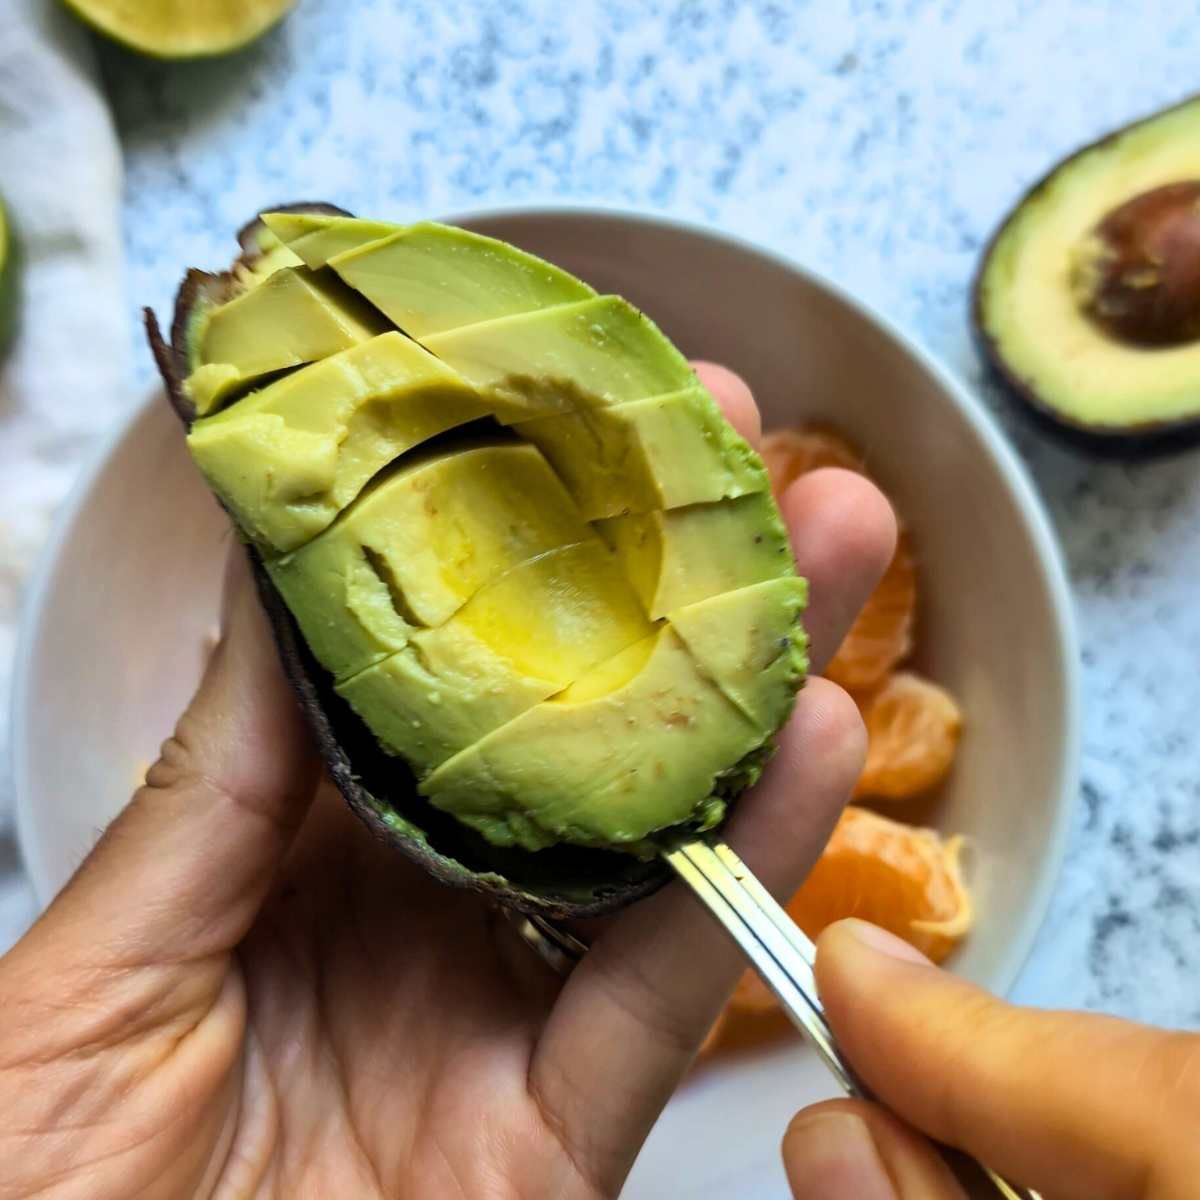 a spoon scooping out the flesh of an avocado into a bowl with orange segments.